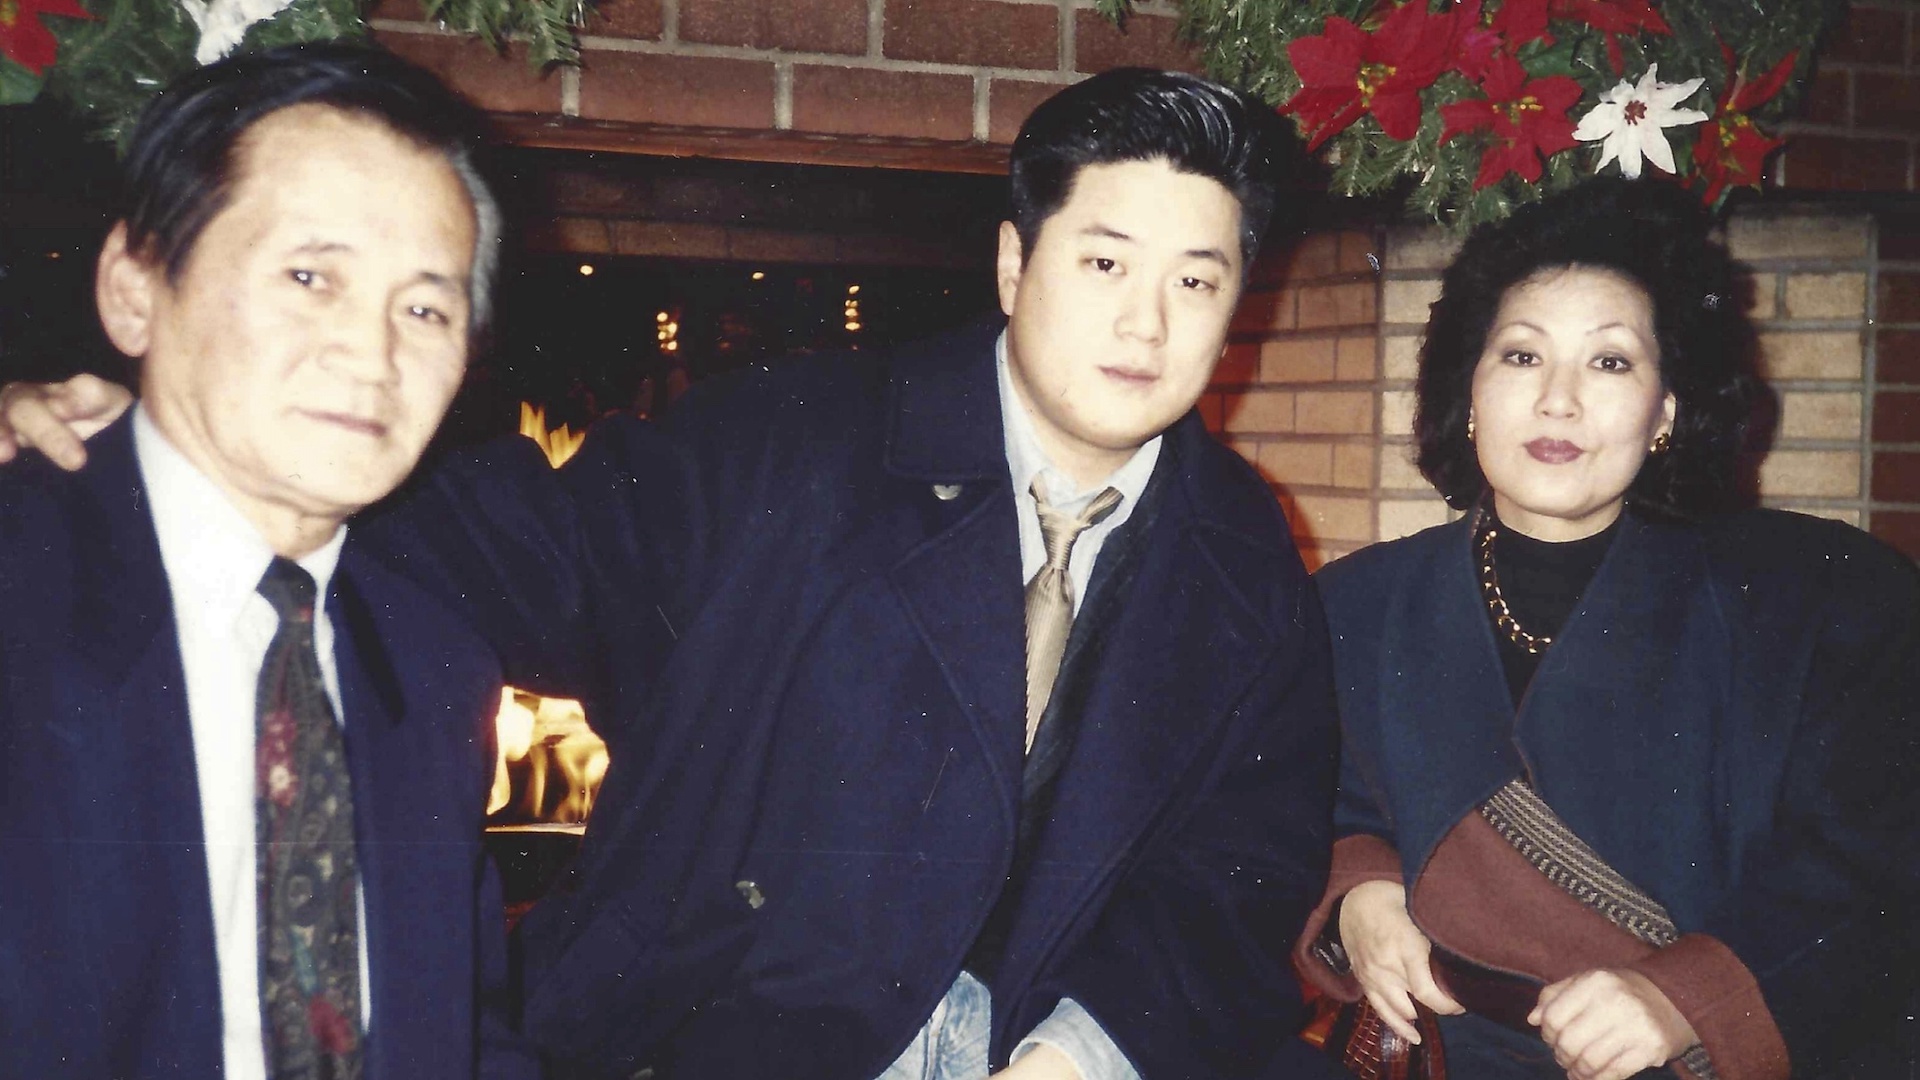 In this undated photo provided by Charlton Rhee, Rhee, a nursing home administrator from New York, poses for a photo with his parents, Man Joon Rhee and Eulja Rhee. Charlton Rhee, whose parents came to the U.S. from South Korea, lost both of them to COVID-19 as the virus surged in New York City. (Courtesy of Charlton Rhee via AP)